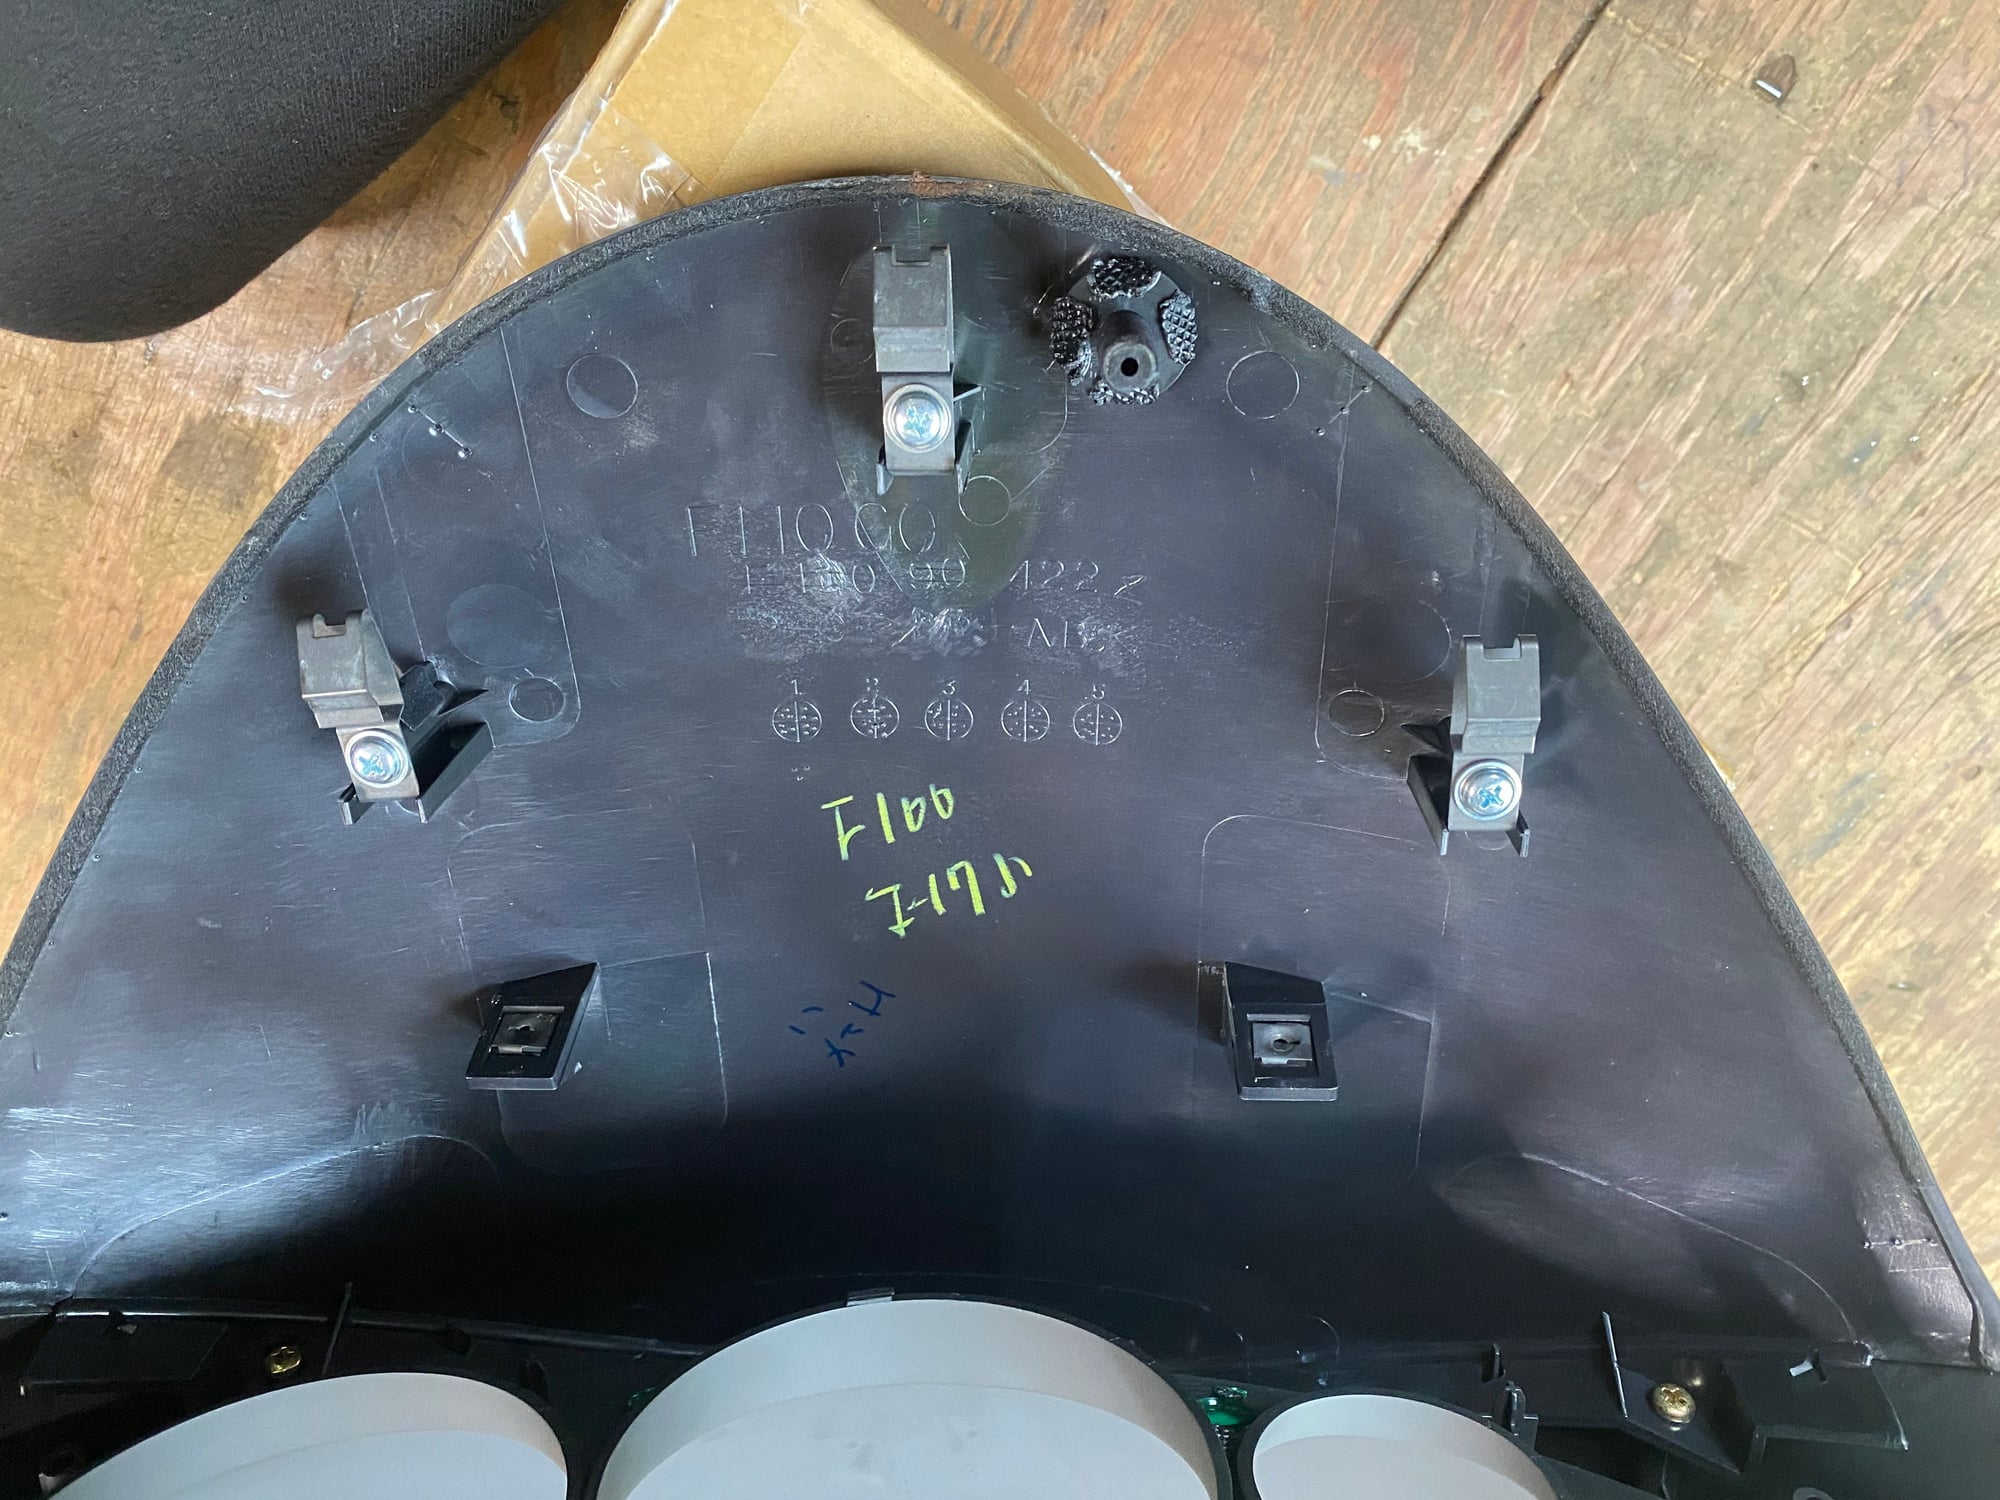 Accessories - RHD FD RX-7 Hood Instrument cluster bezel in Excellent Condition! - Used - 1992 to 2003 Mazda RX-7 - Prince Frederick, MD 20678, United States